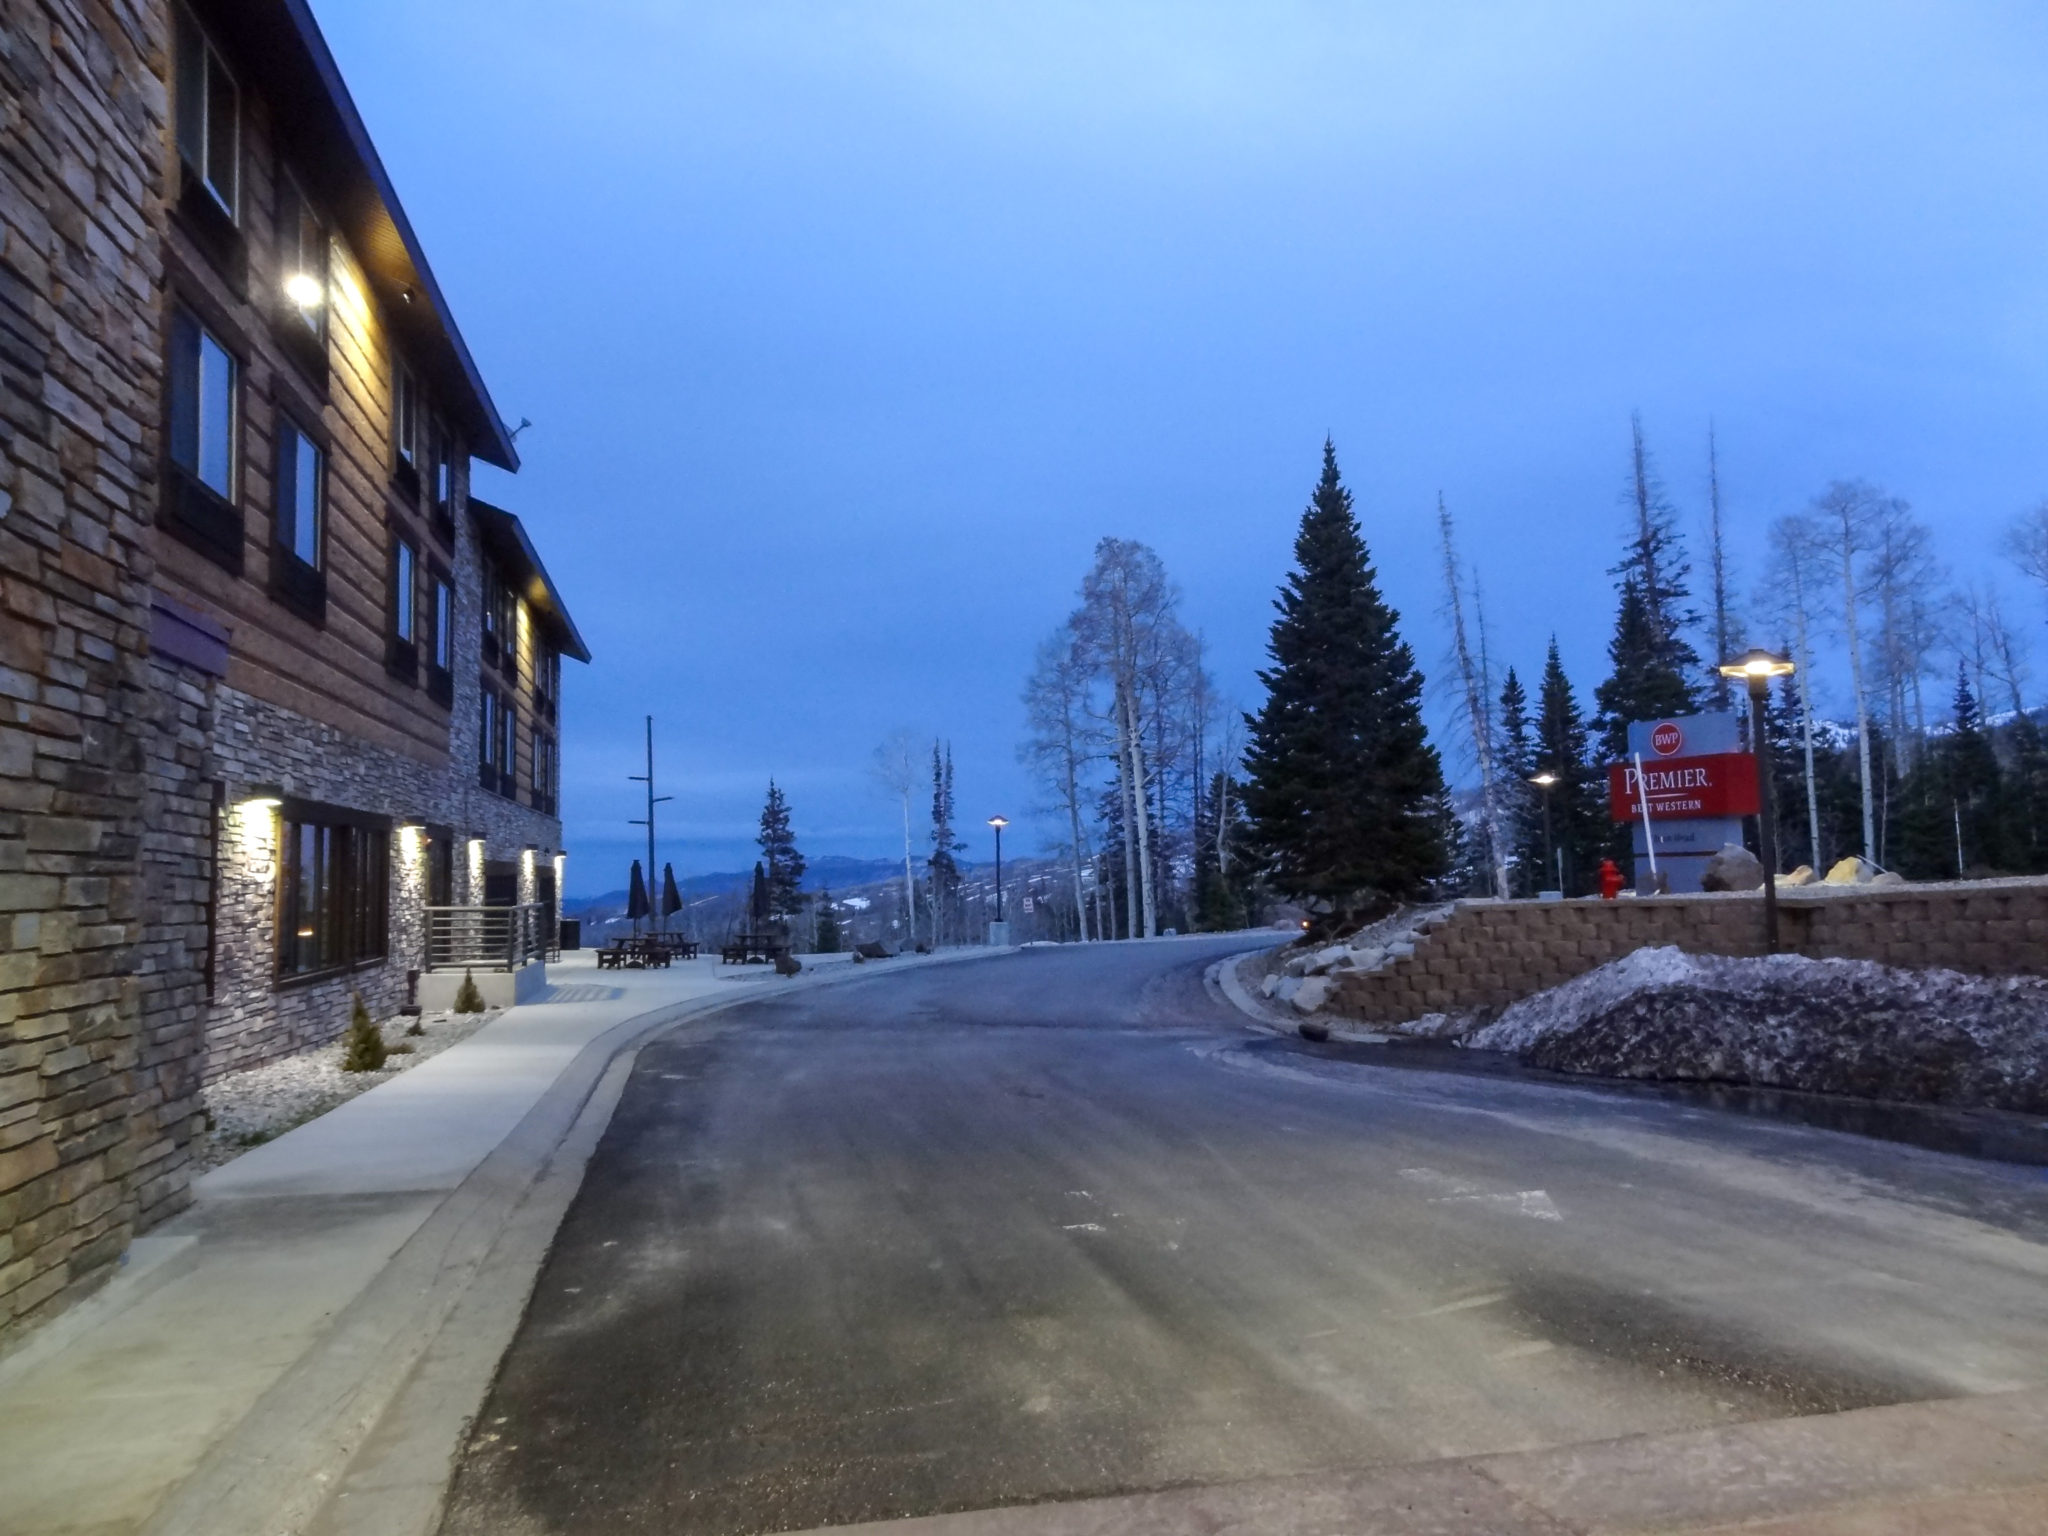 Best Western Premier Brian Head Utah is a lovely lodge-style place to stay when visiting Cedar Breaks National Park. This resort offers beautiful views some 10,000 feet above sea-level in the ski-town of Brian Head. #travel #utah #placestostay #parktripsandmore